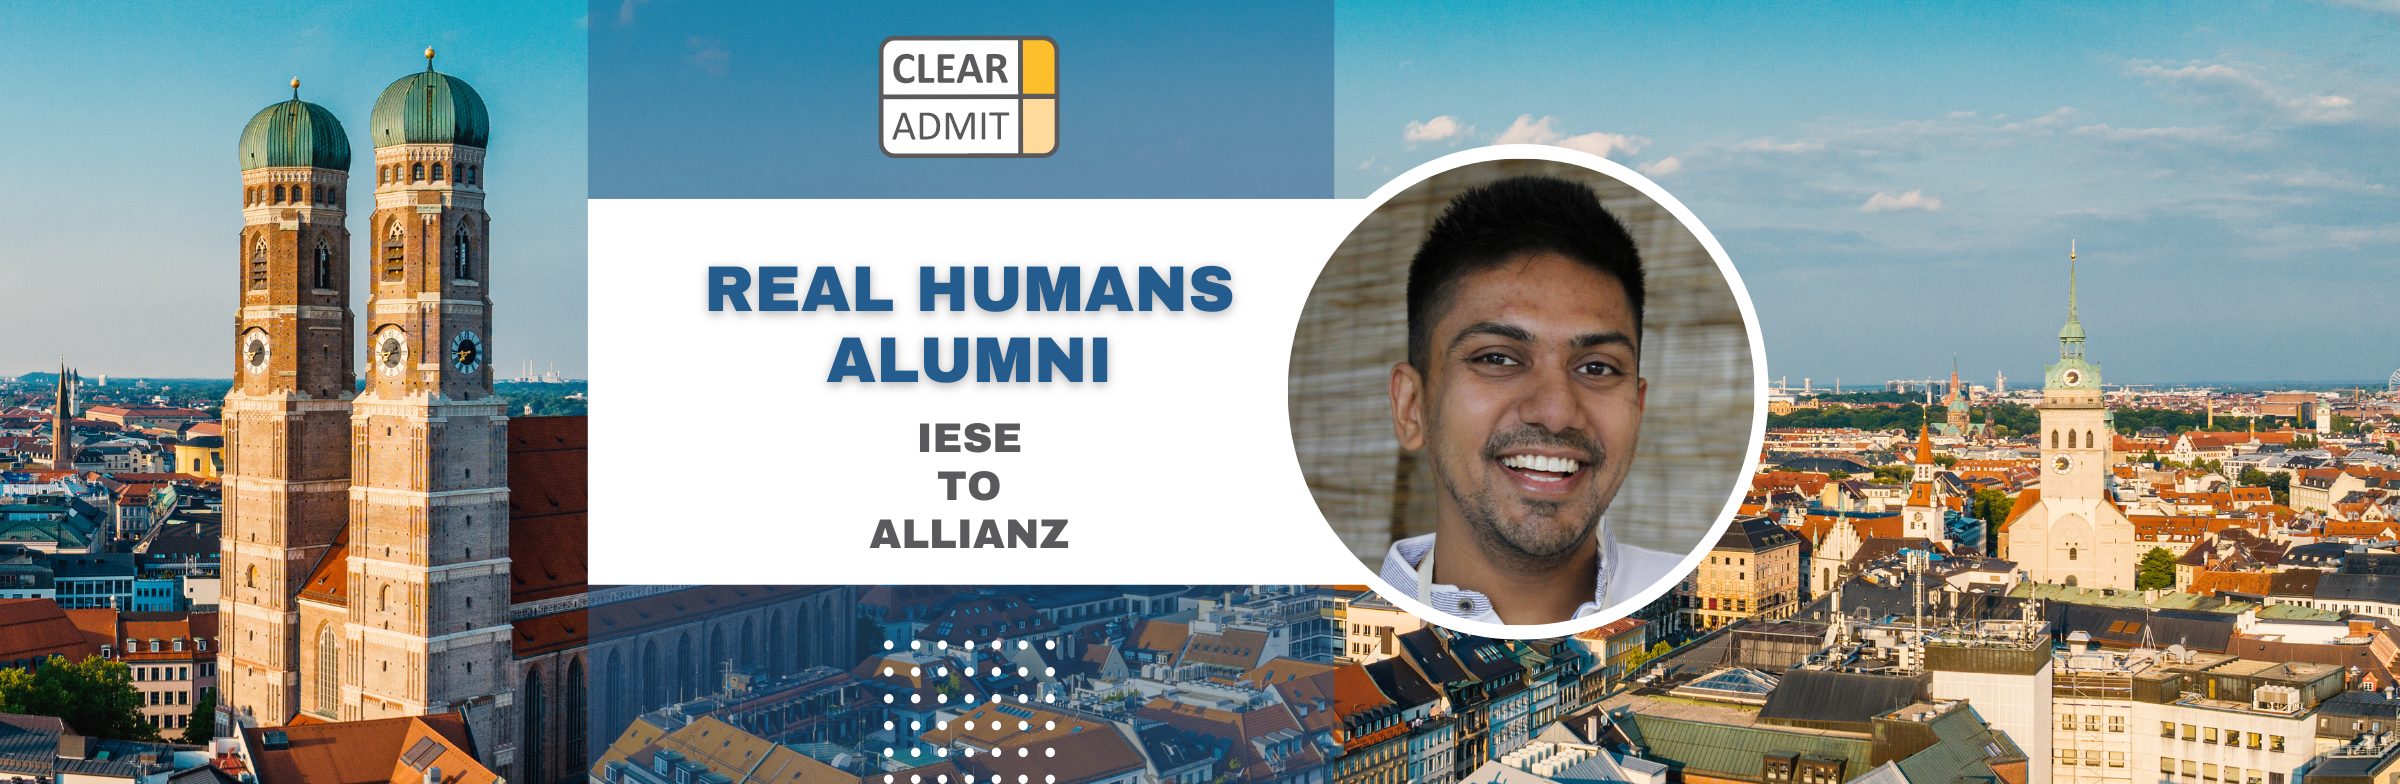 Image for Real Humans of Allianz: Anant Gupta, IESE MBA ’22, Senior Consultant